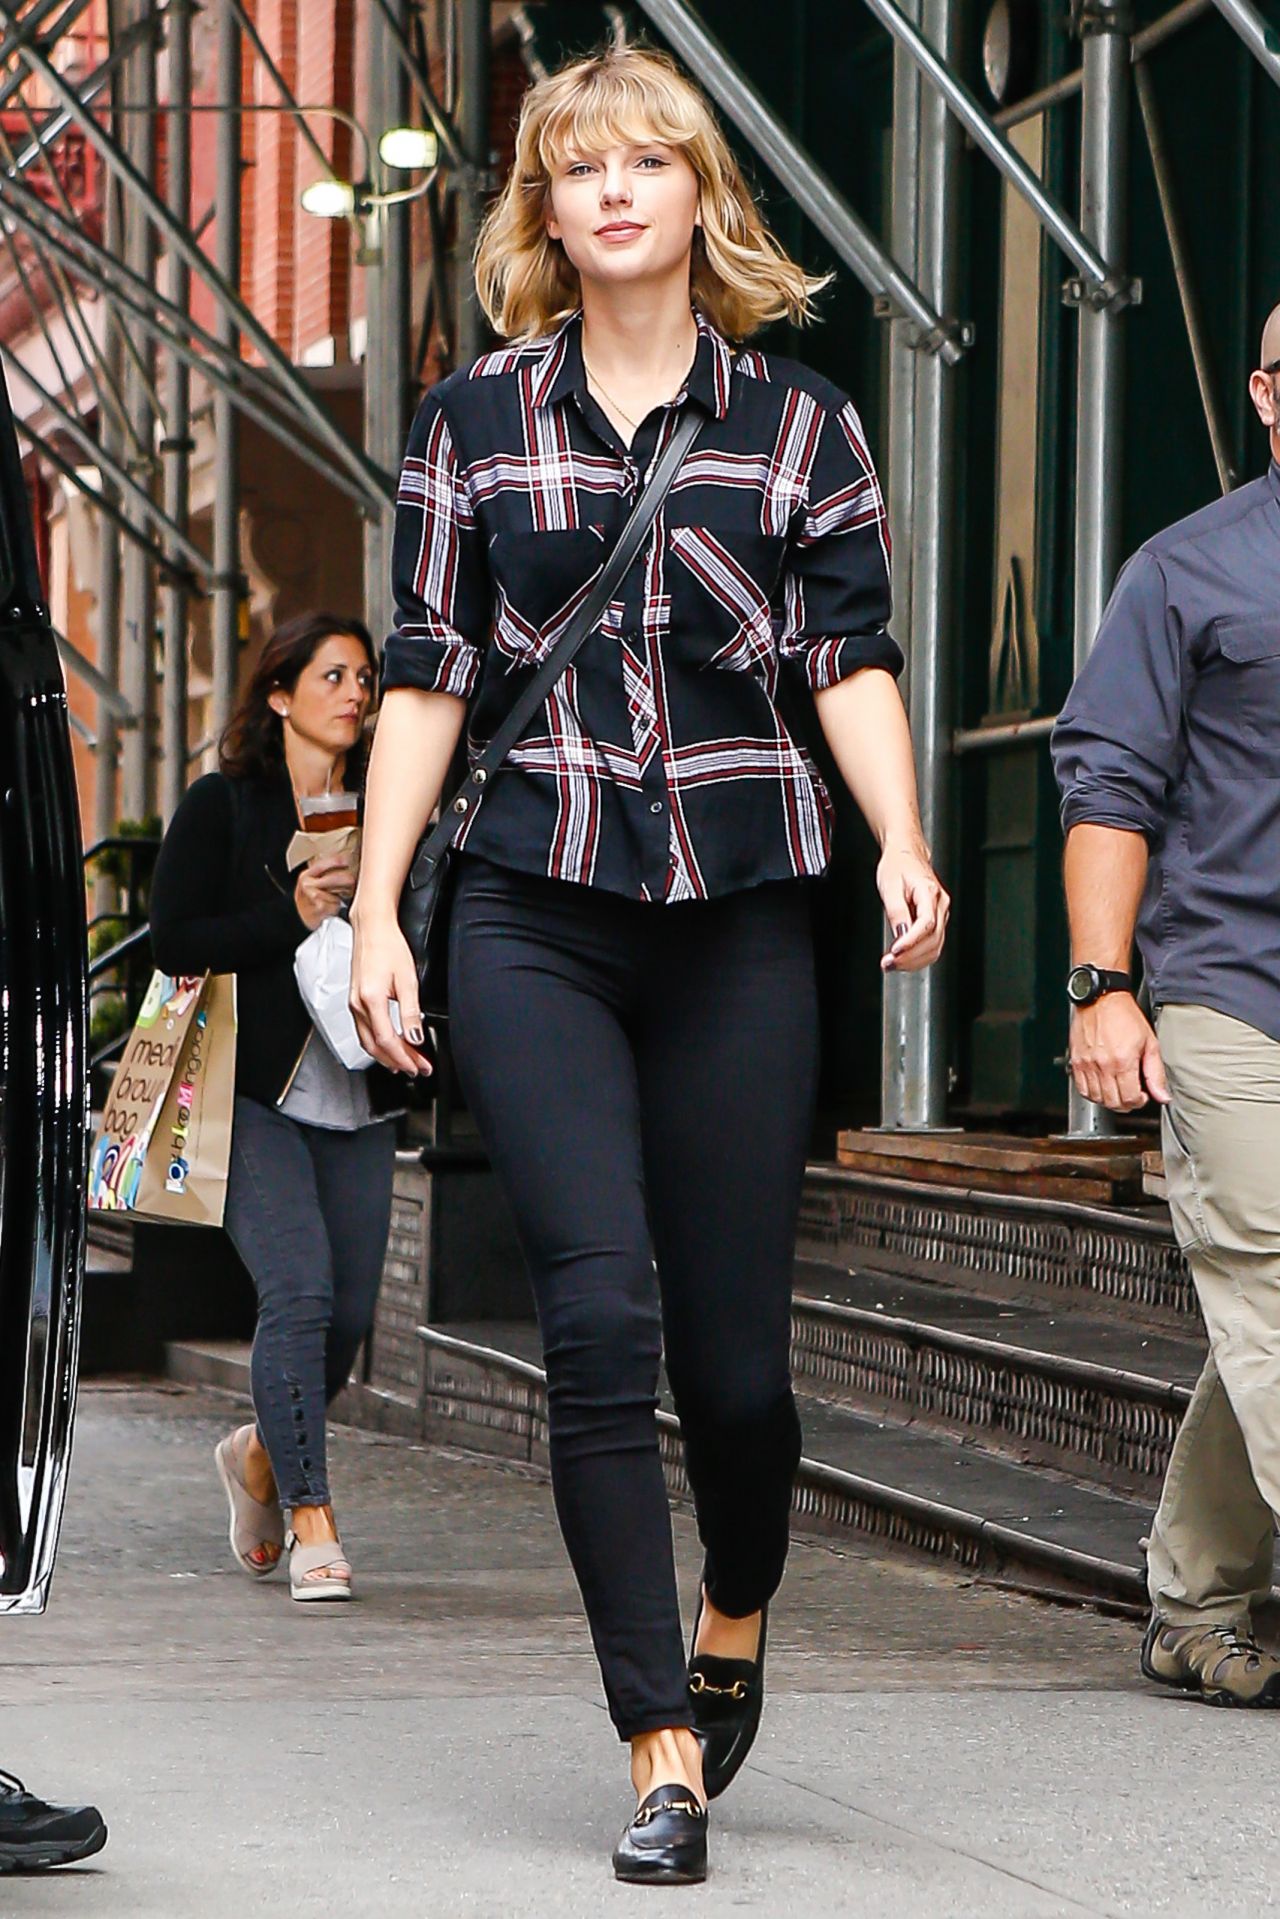 Taylor Swift Casual Style - Tribeca, NYC 9/28/ 2016